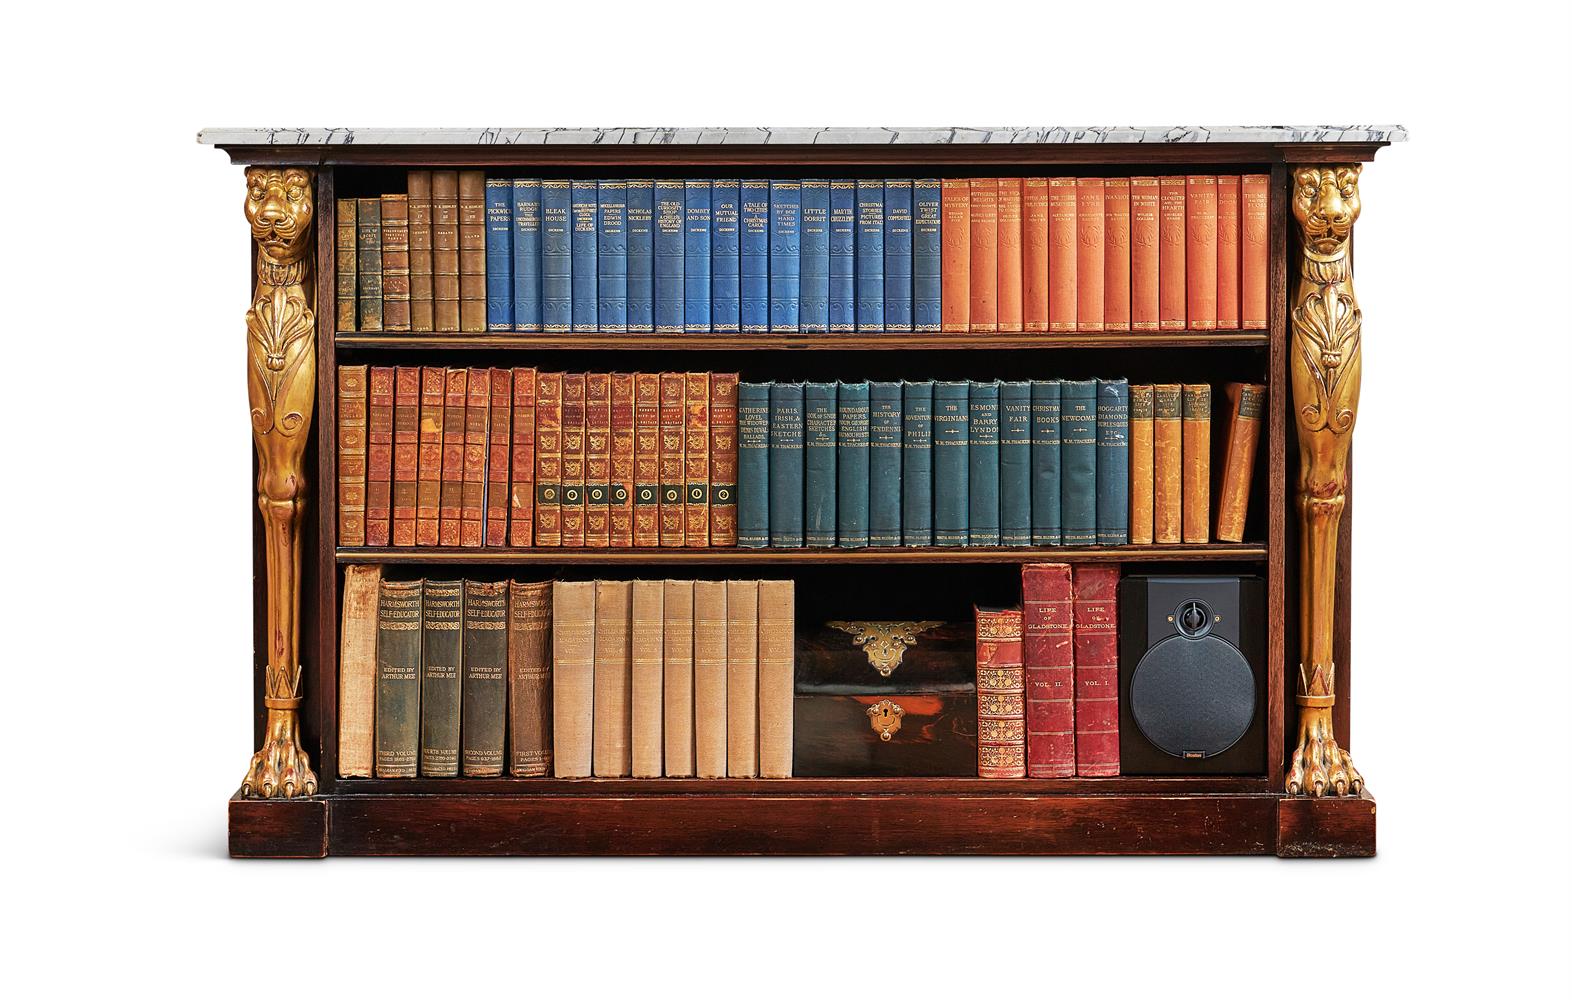 A PAIR OF REGENCY STYLE 'FOSBURY' BOOKCASES, ROBERT KIME